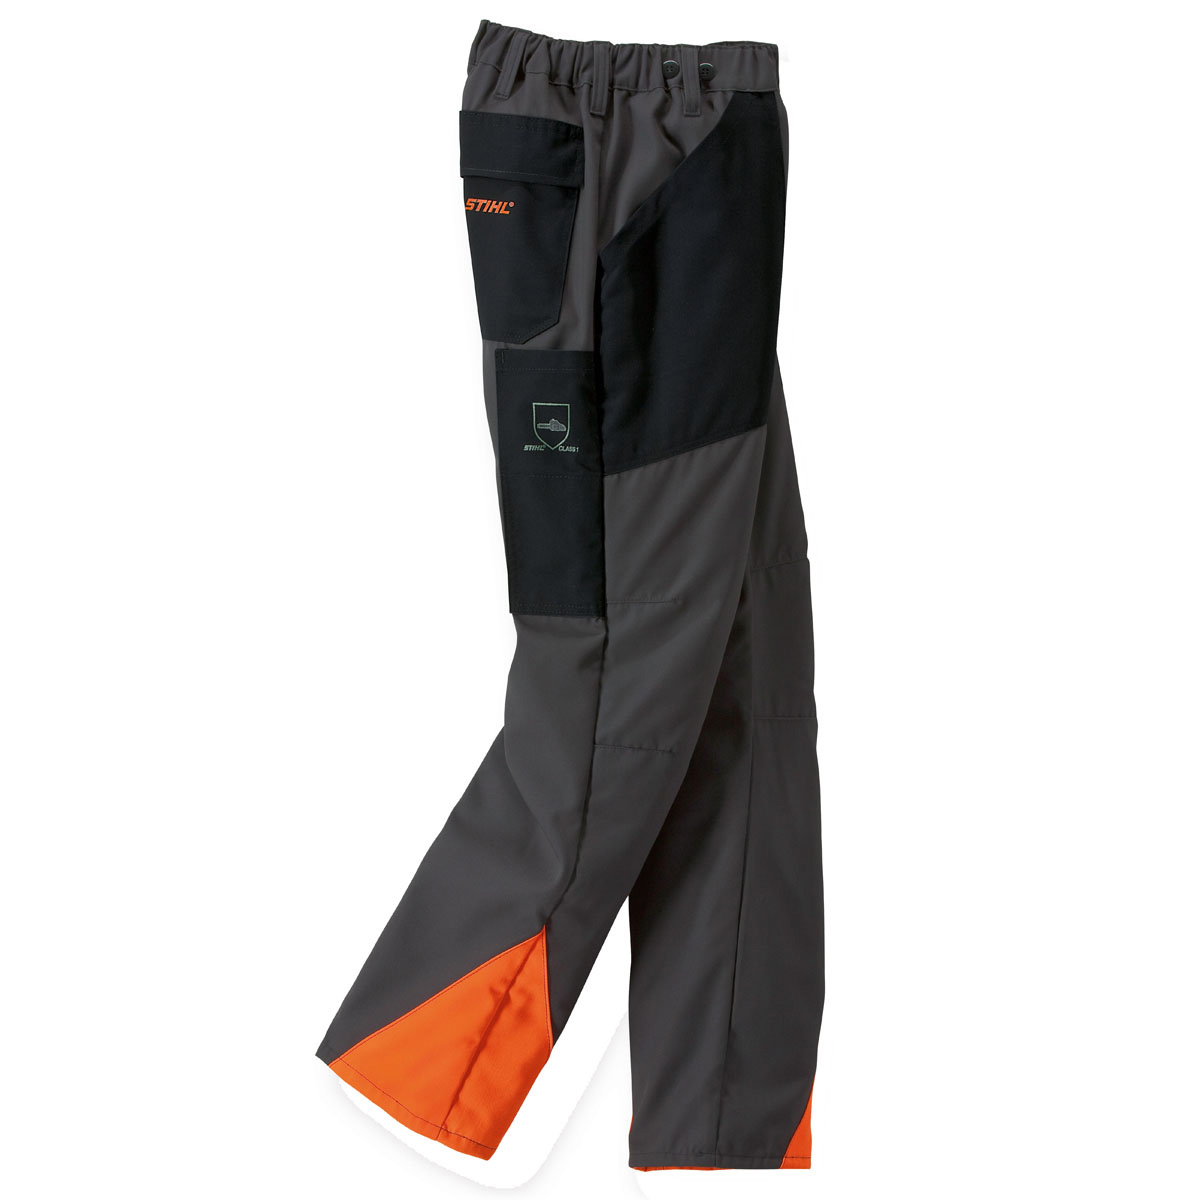 Stihl Function Chainsaw Trousers